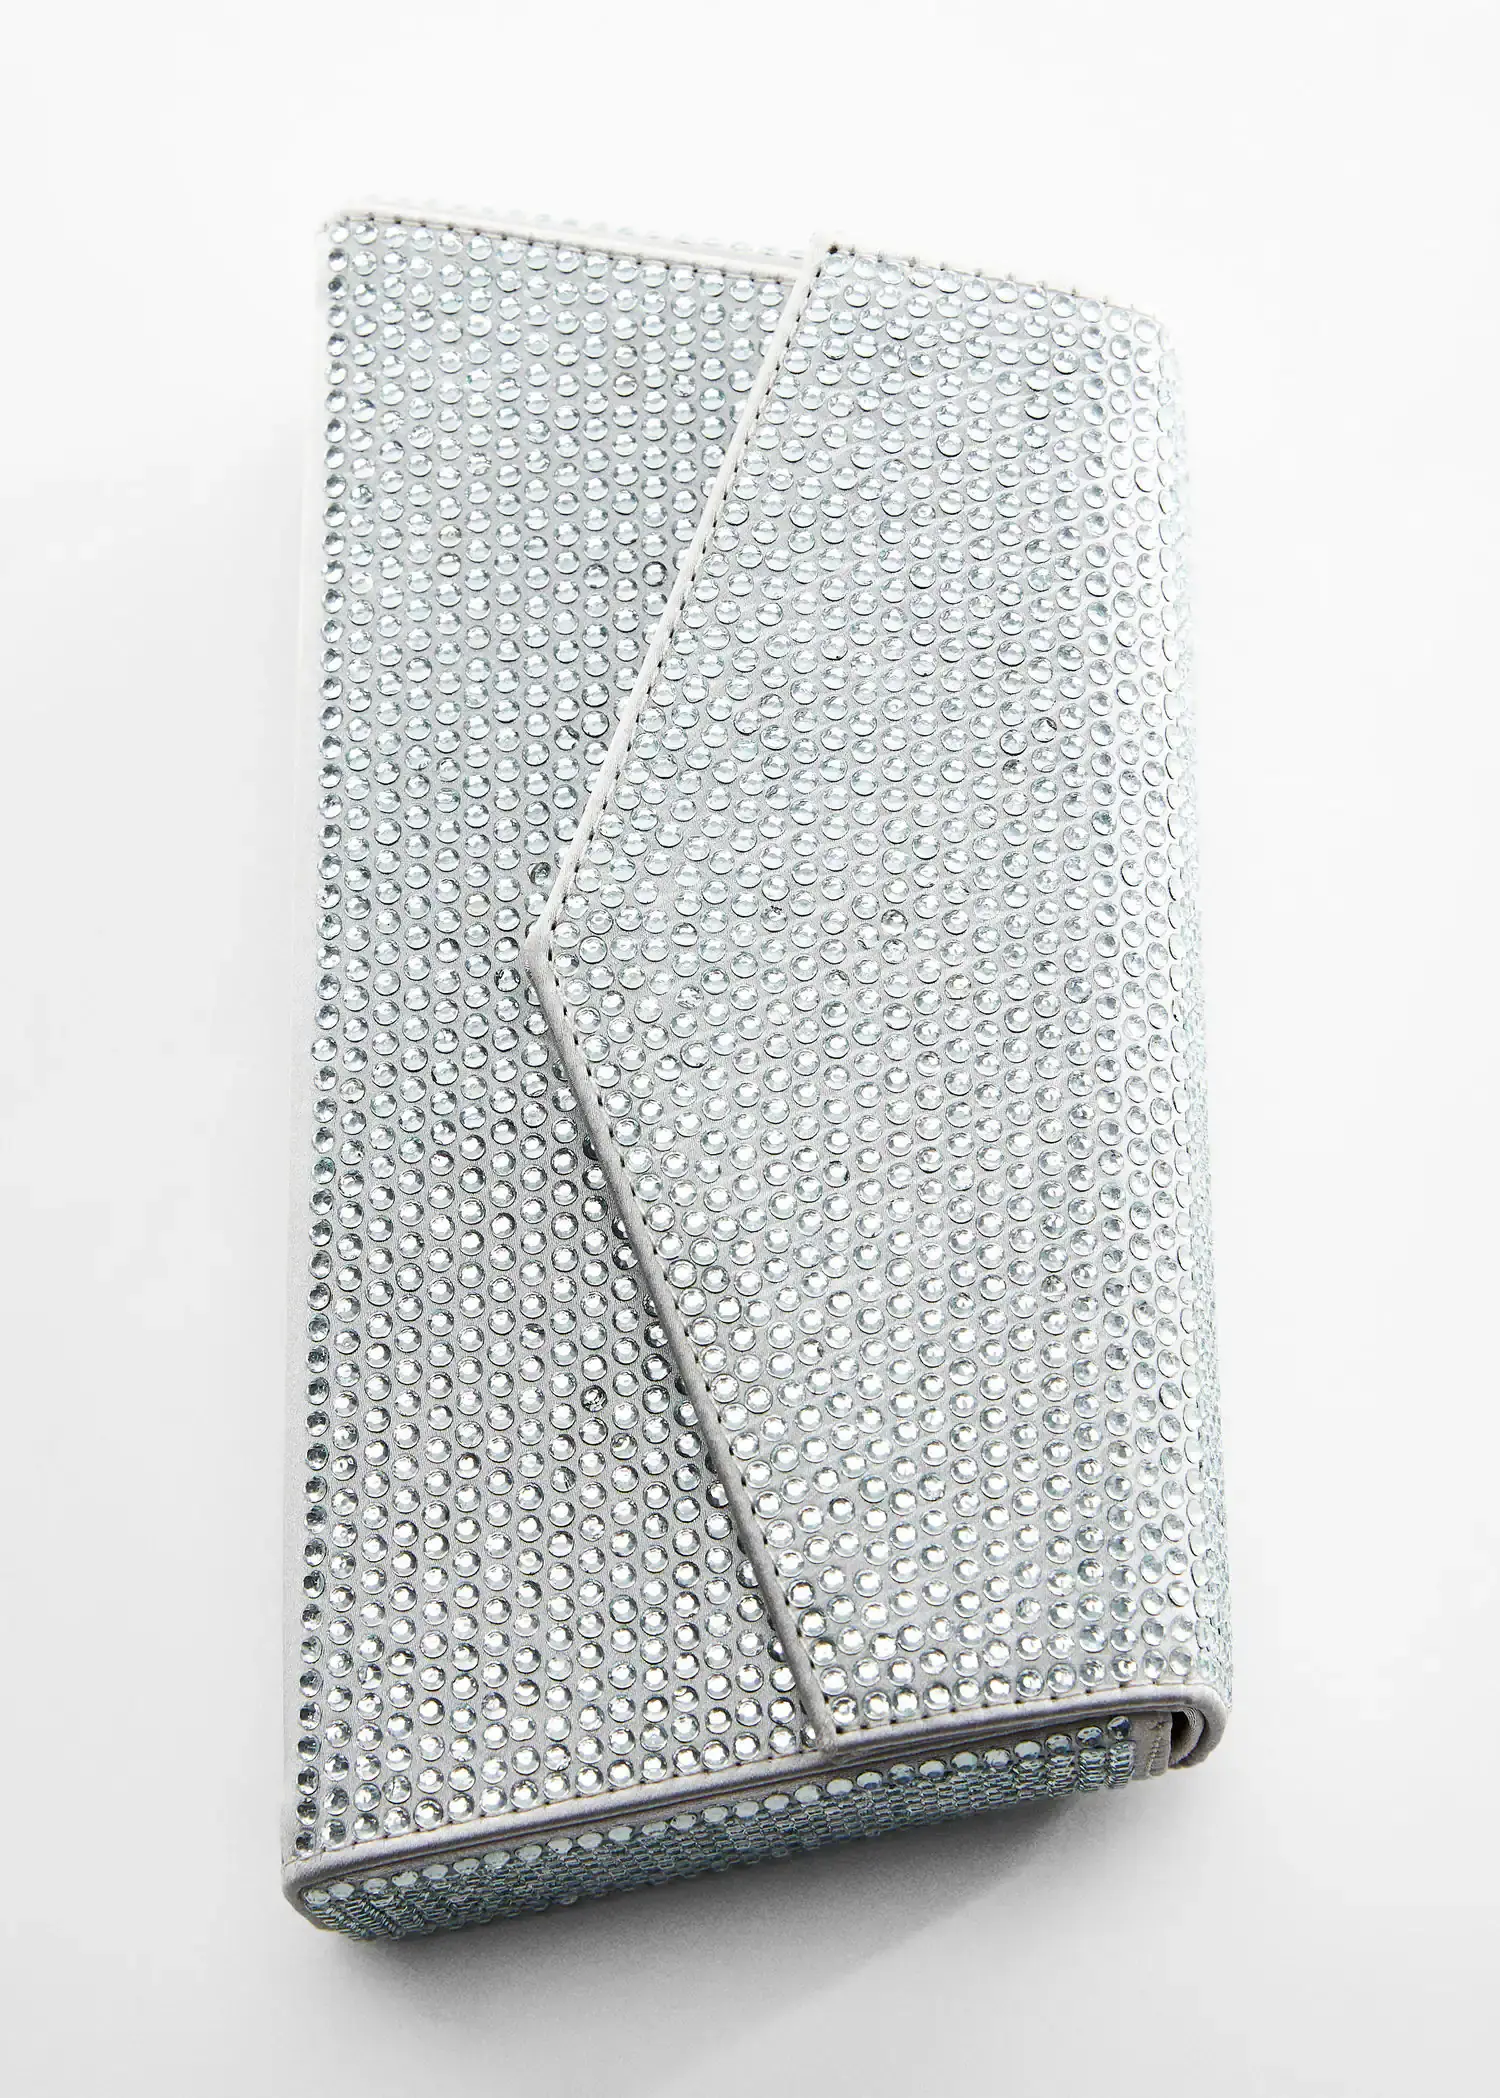 Mango Chain bag with crystals. a silver wallet with a diamond pattern on it. 